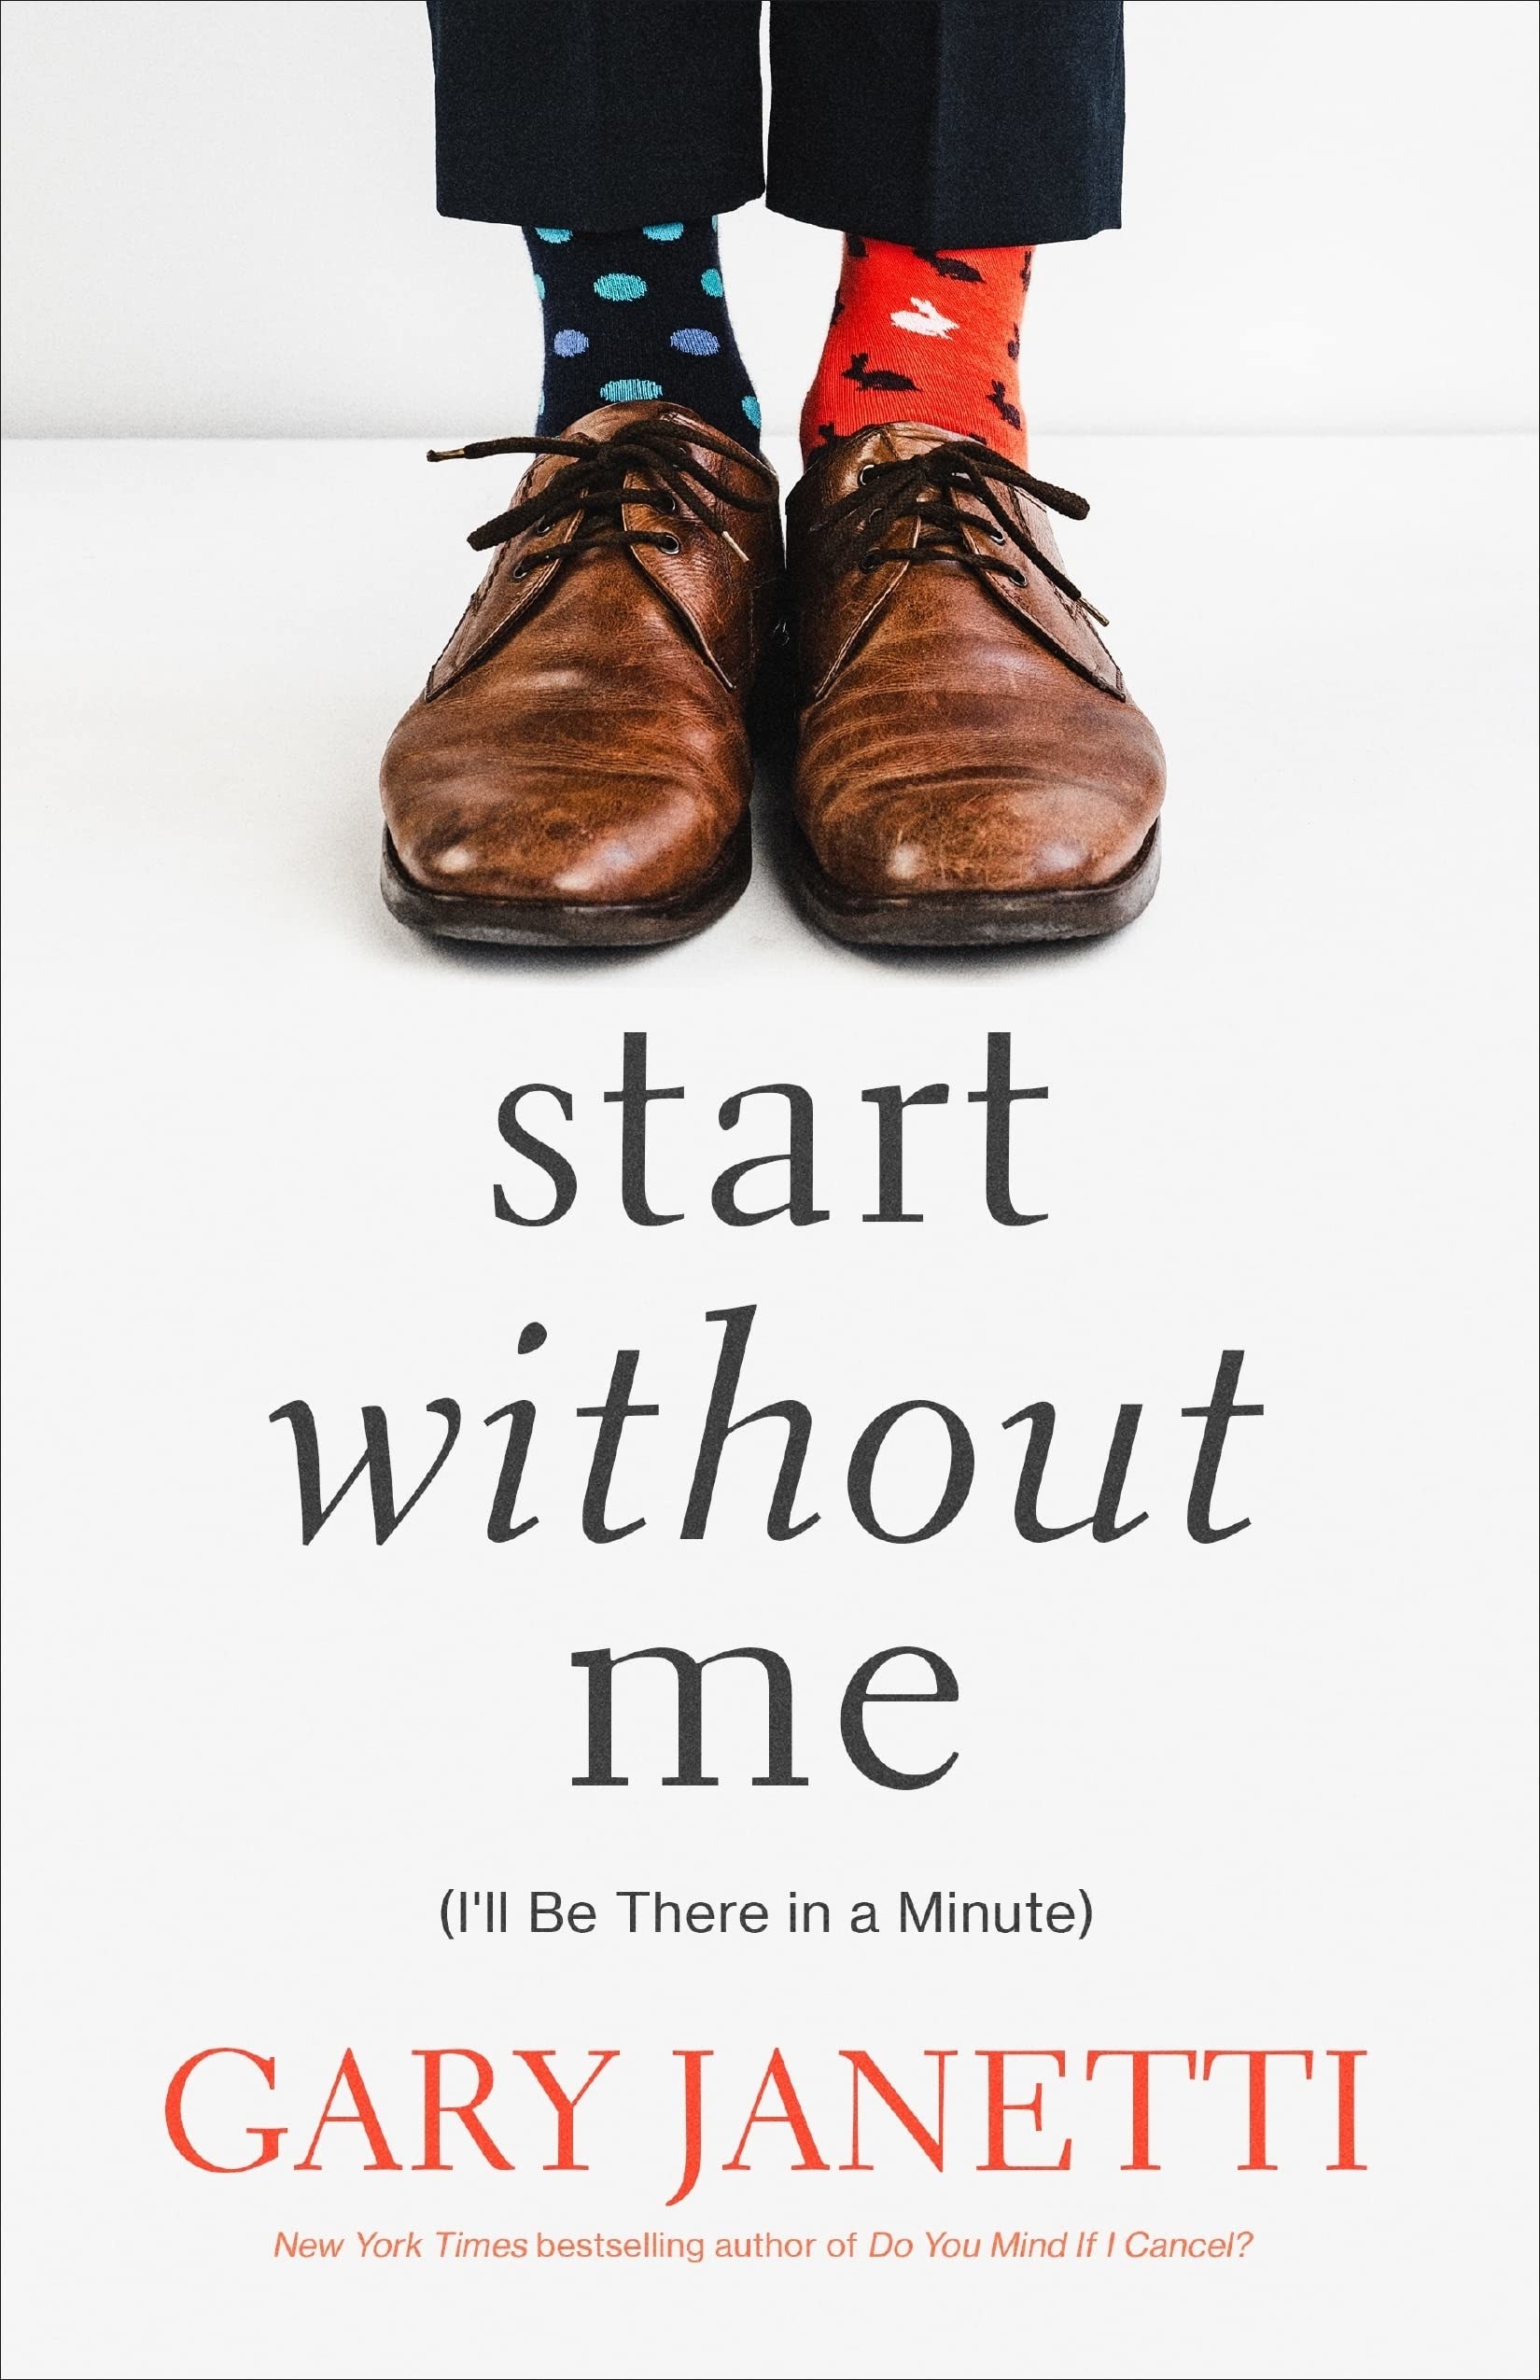 The cover of &quot;Start Without Me&quot; by Gary Janetti